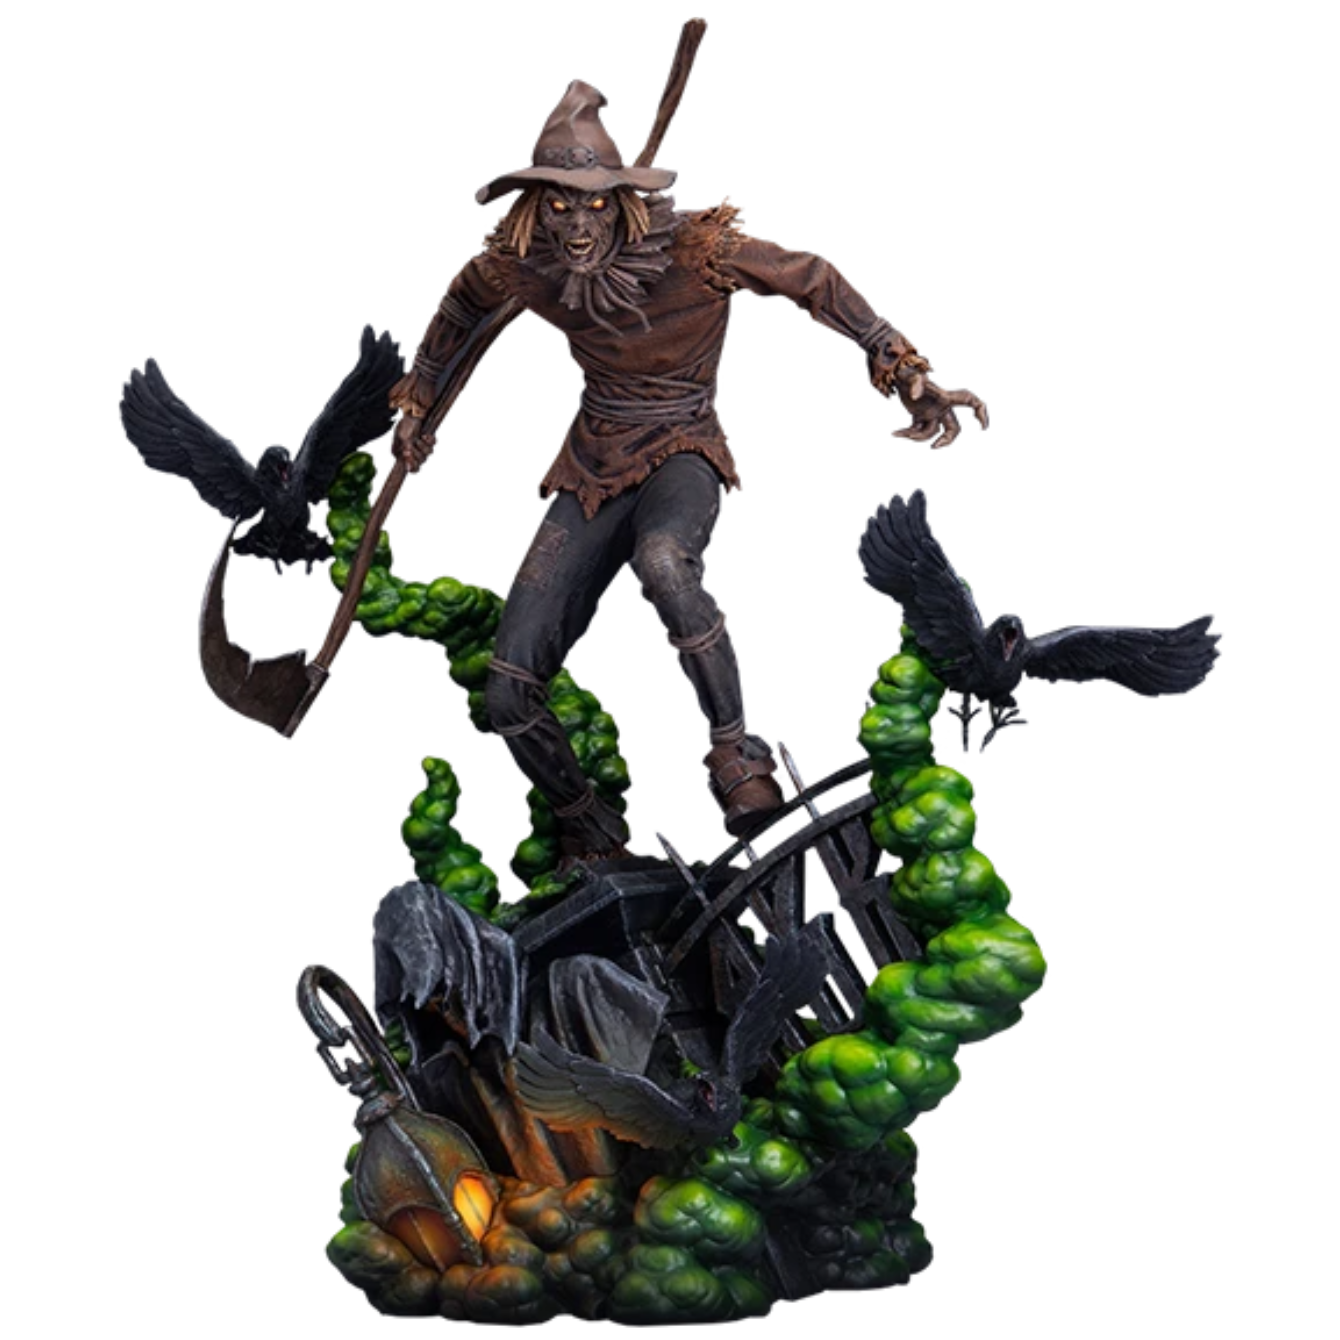 SCARECROW Maquette by Tweeterhead